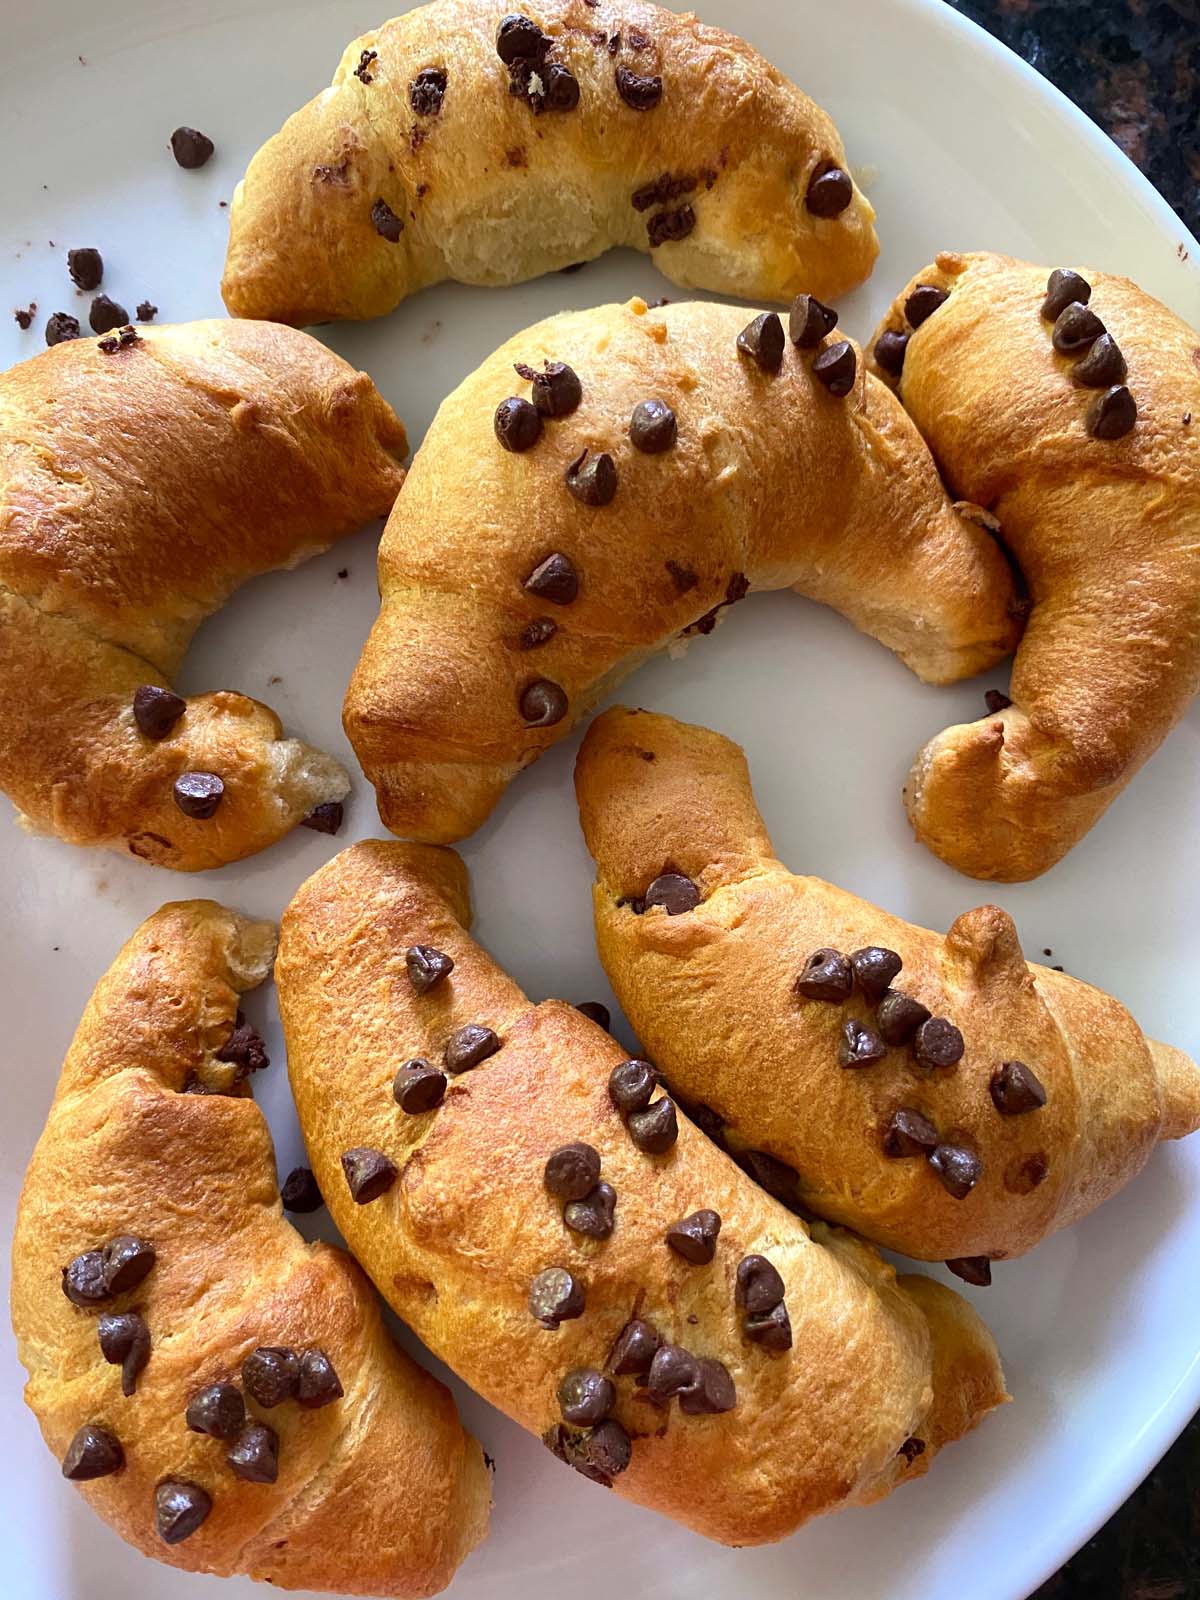 Chocolate croissants on a plate.